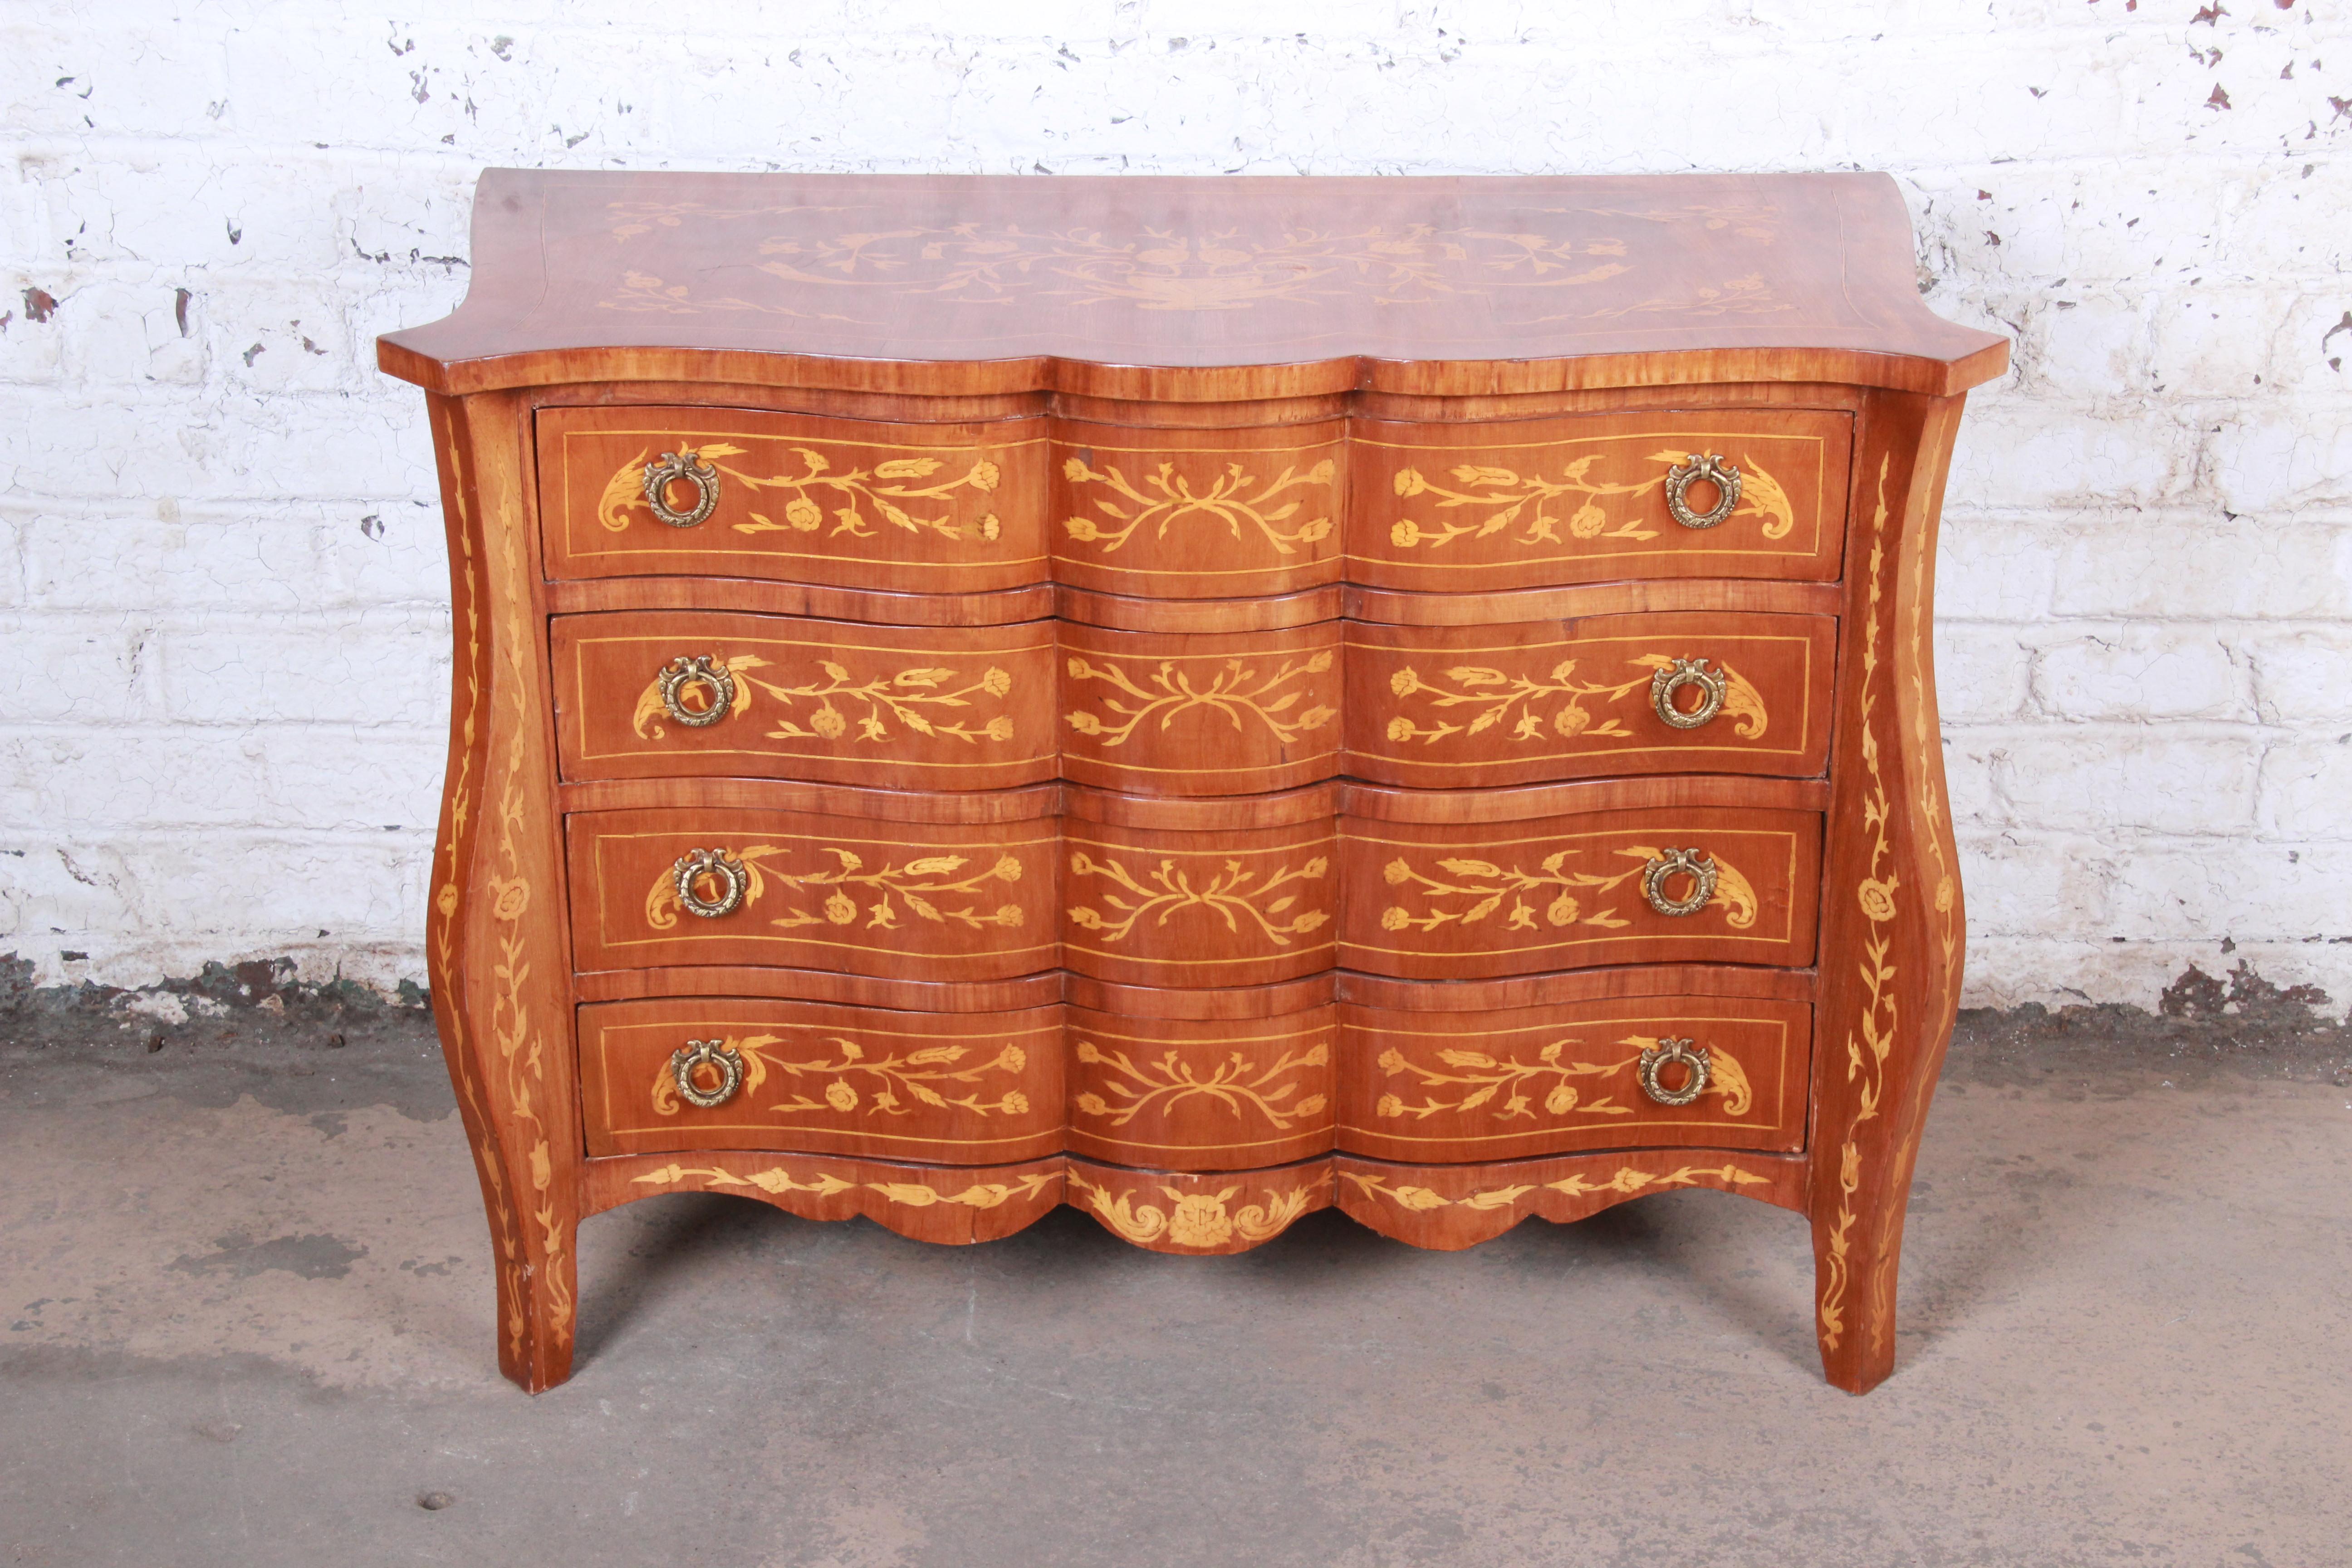 An exceptional Italian inlaid marquetry mahogany four-drawer bachelor chest of drawers or commode

Italy, circa 1930s

Mahogany, satinwood inlay and original brass hardware

Measures: 43.25